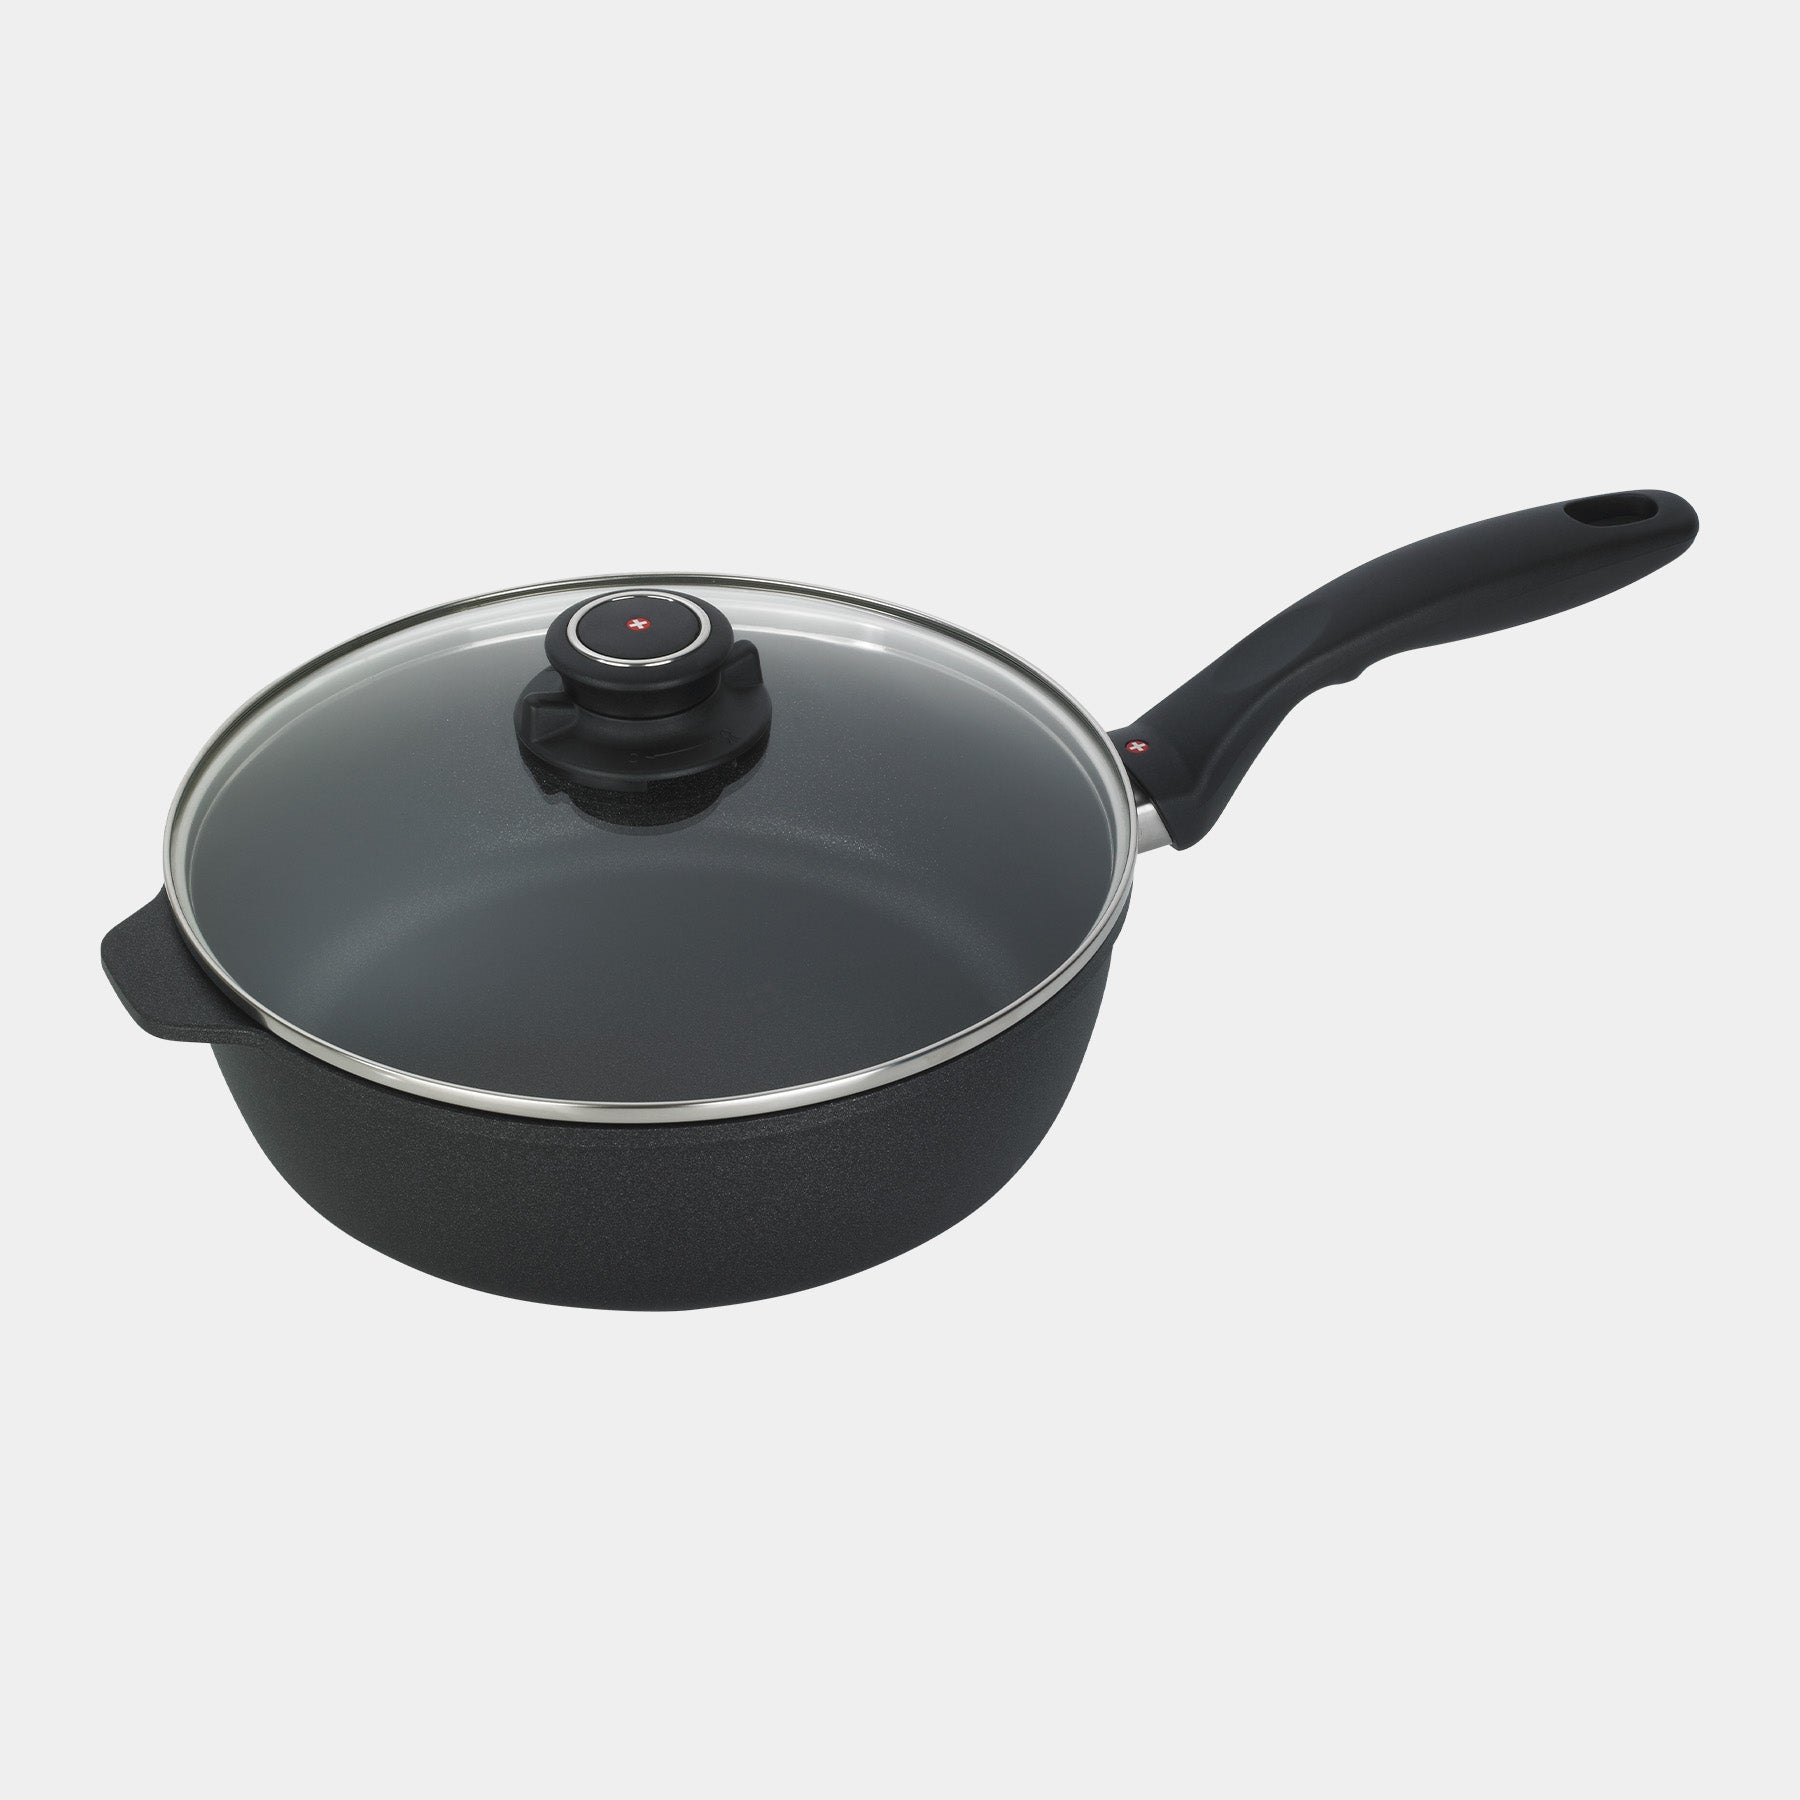 XD Nonstick 3.2 qt Saute Pan with Glass Lid - Induction